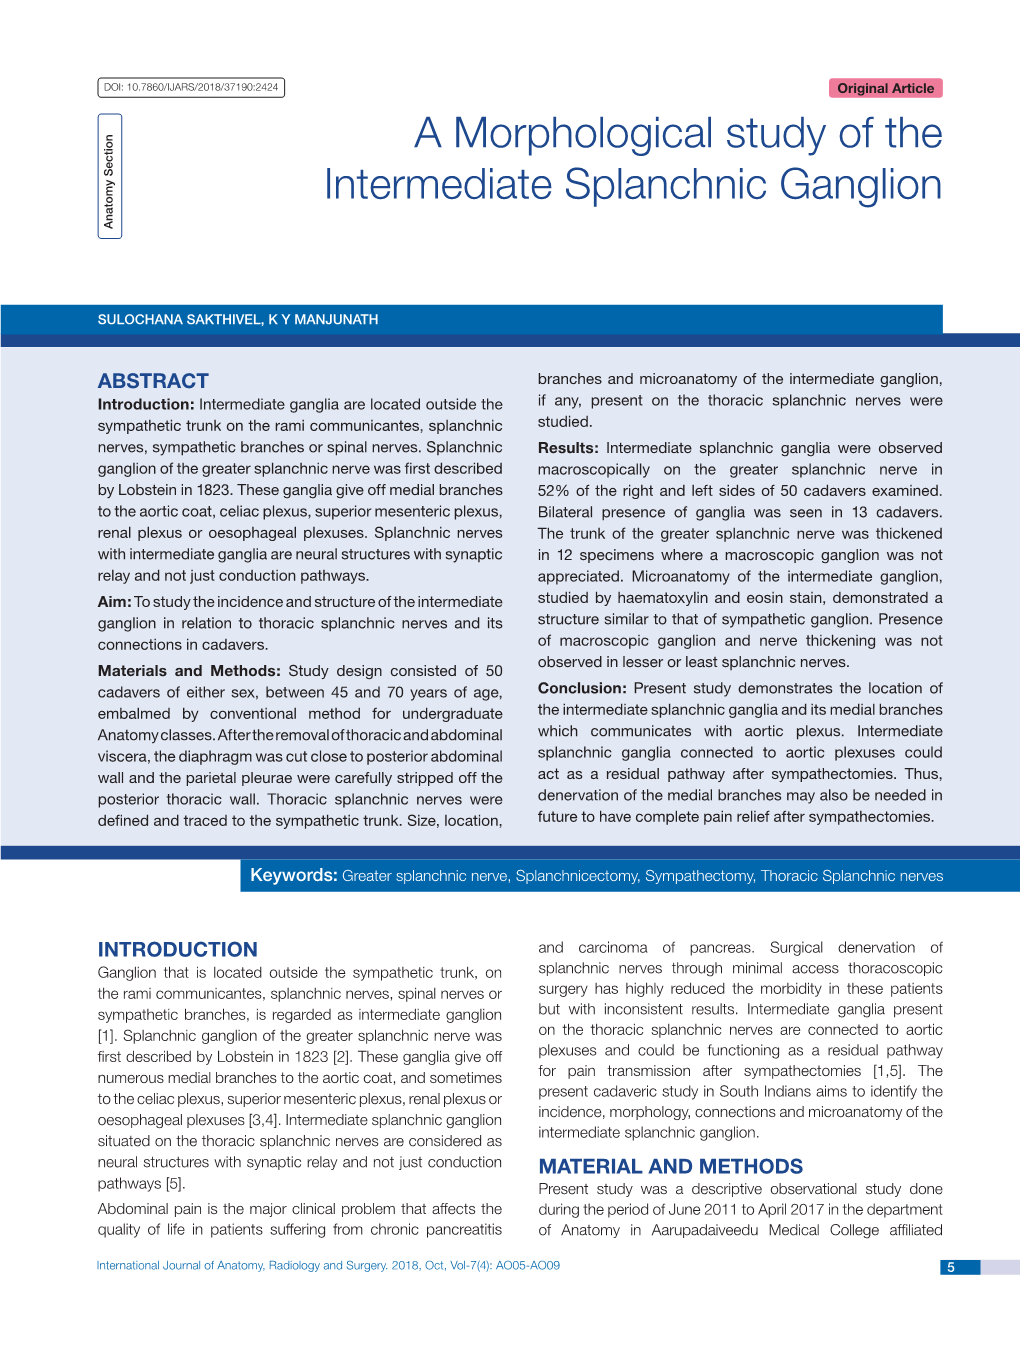 A Morphological Study of the Intermediate Splanchnic Ganglion Anatomy Section